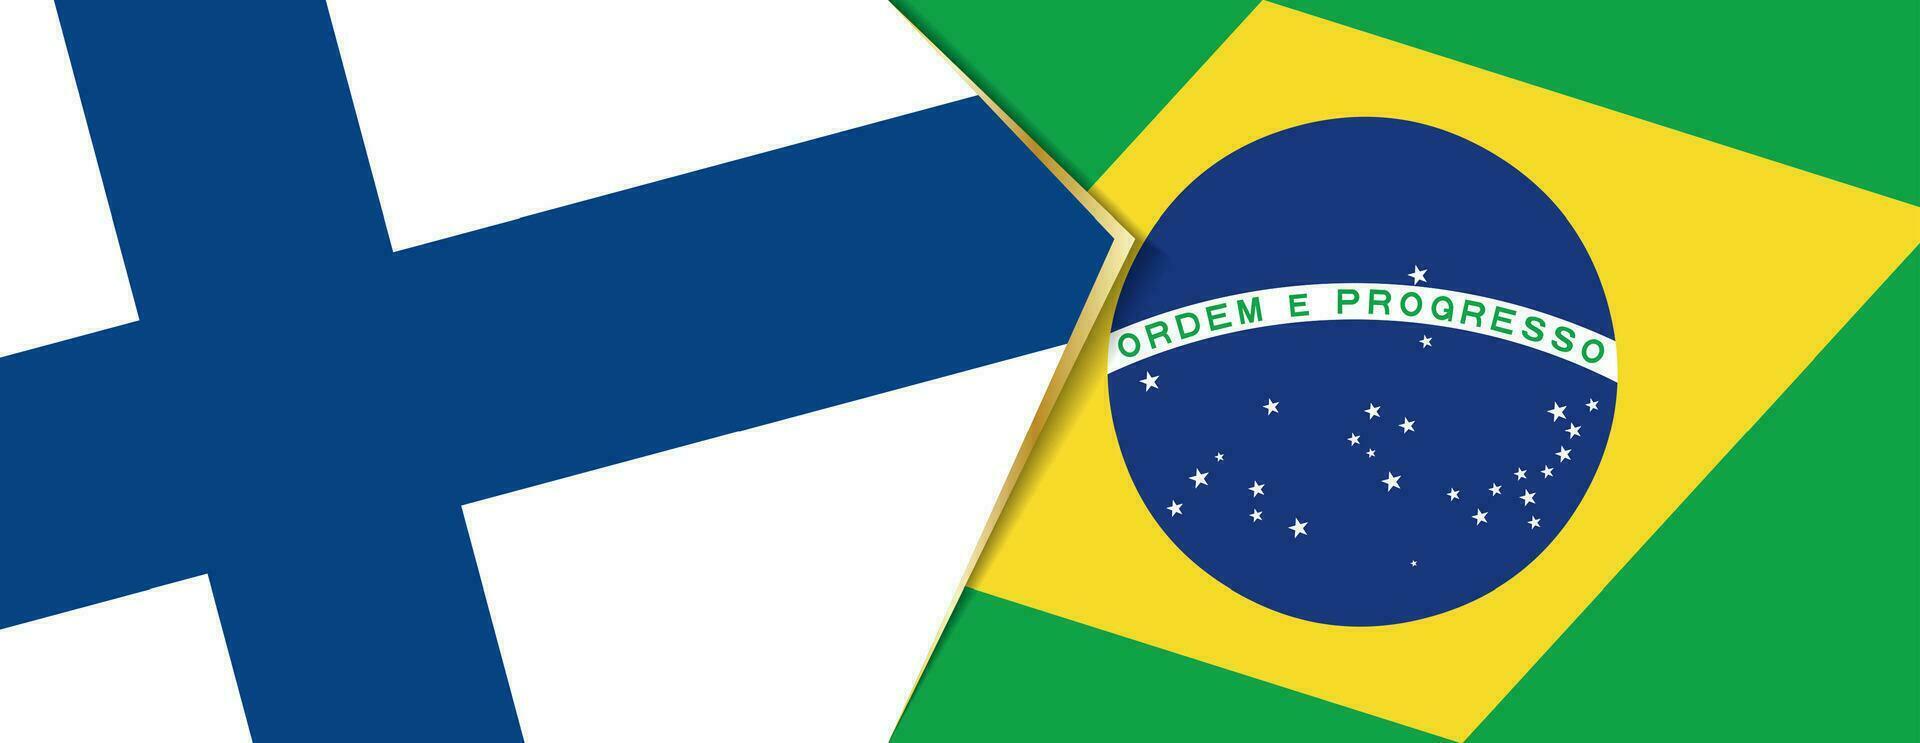 Finland and Brazil flags, two vector flags.